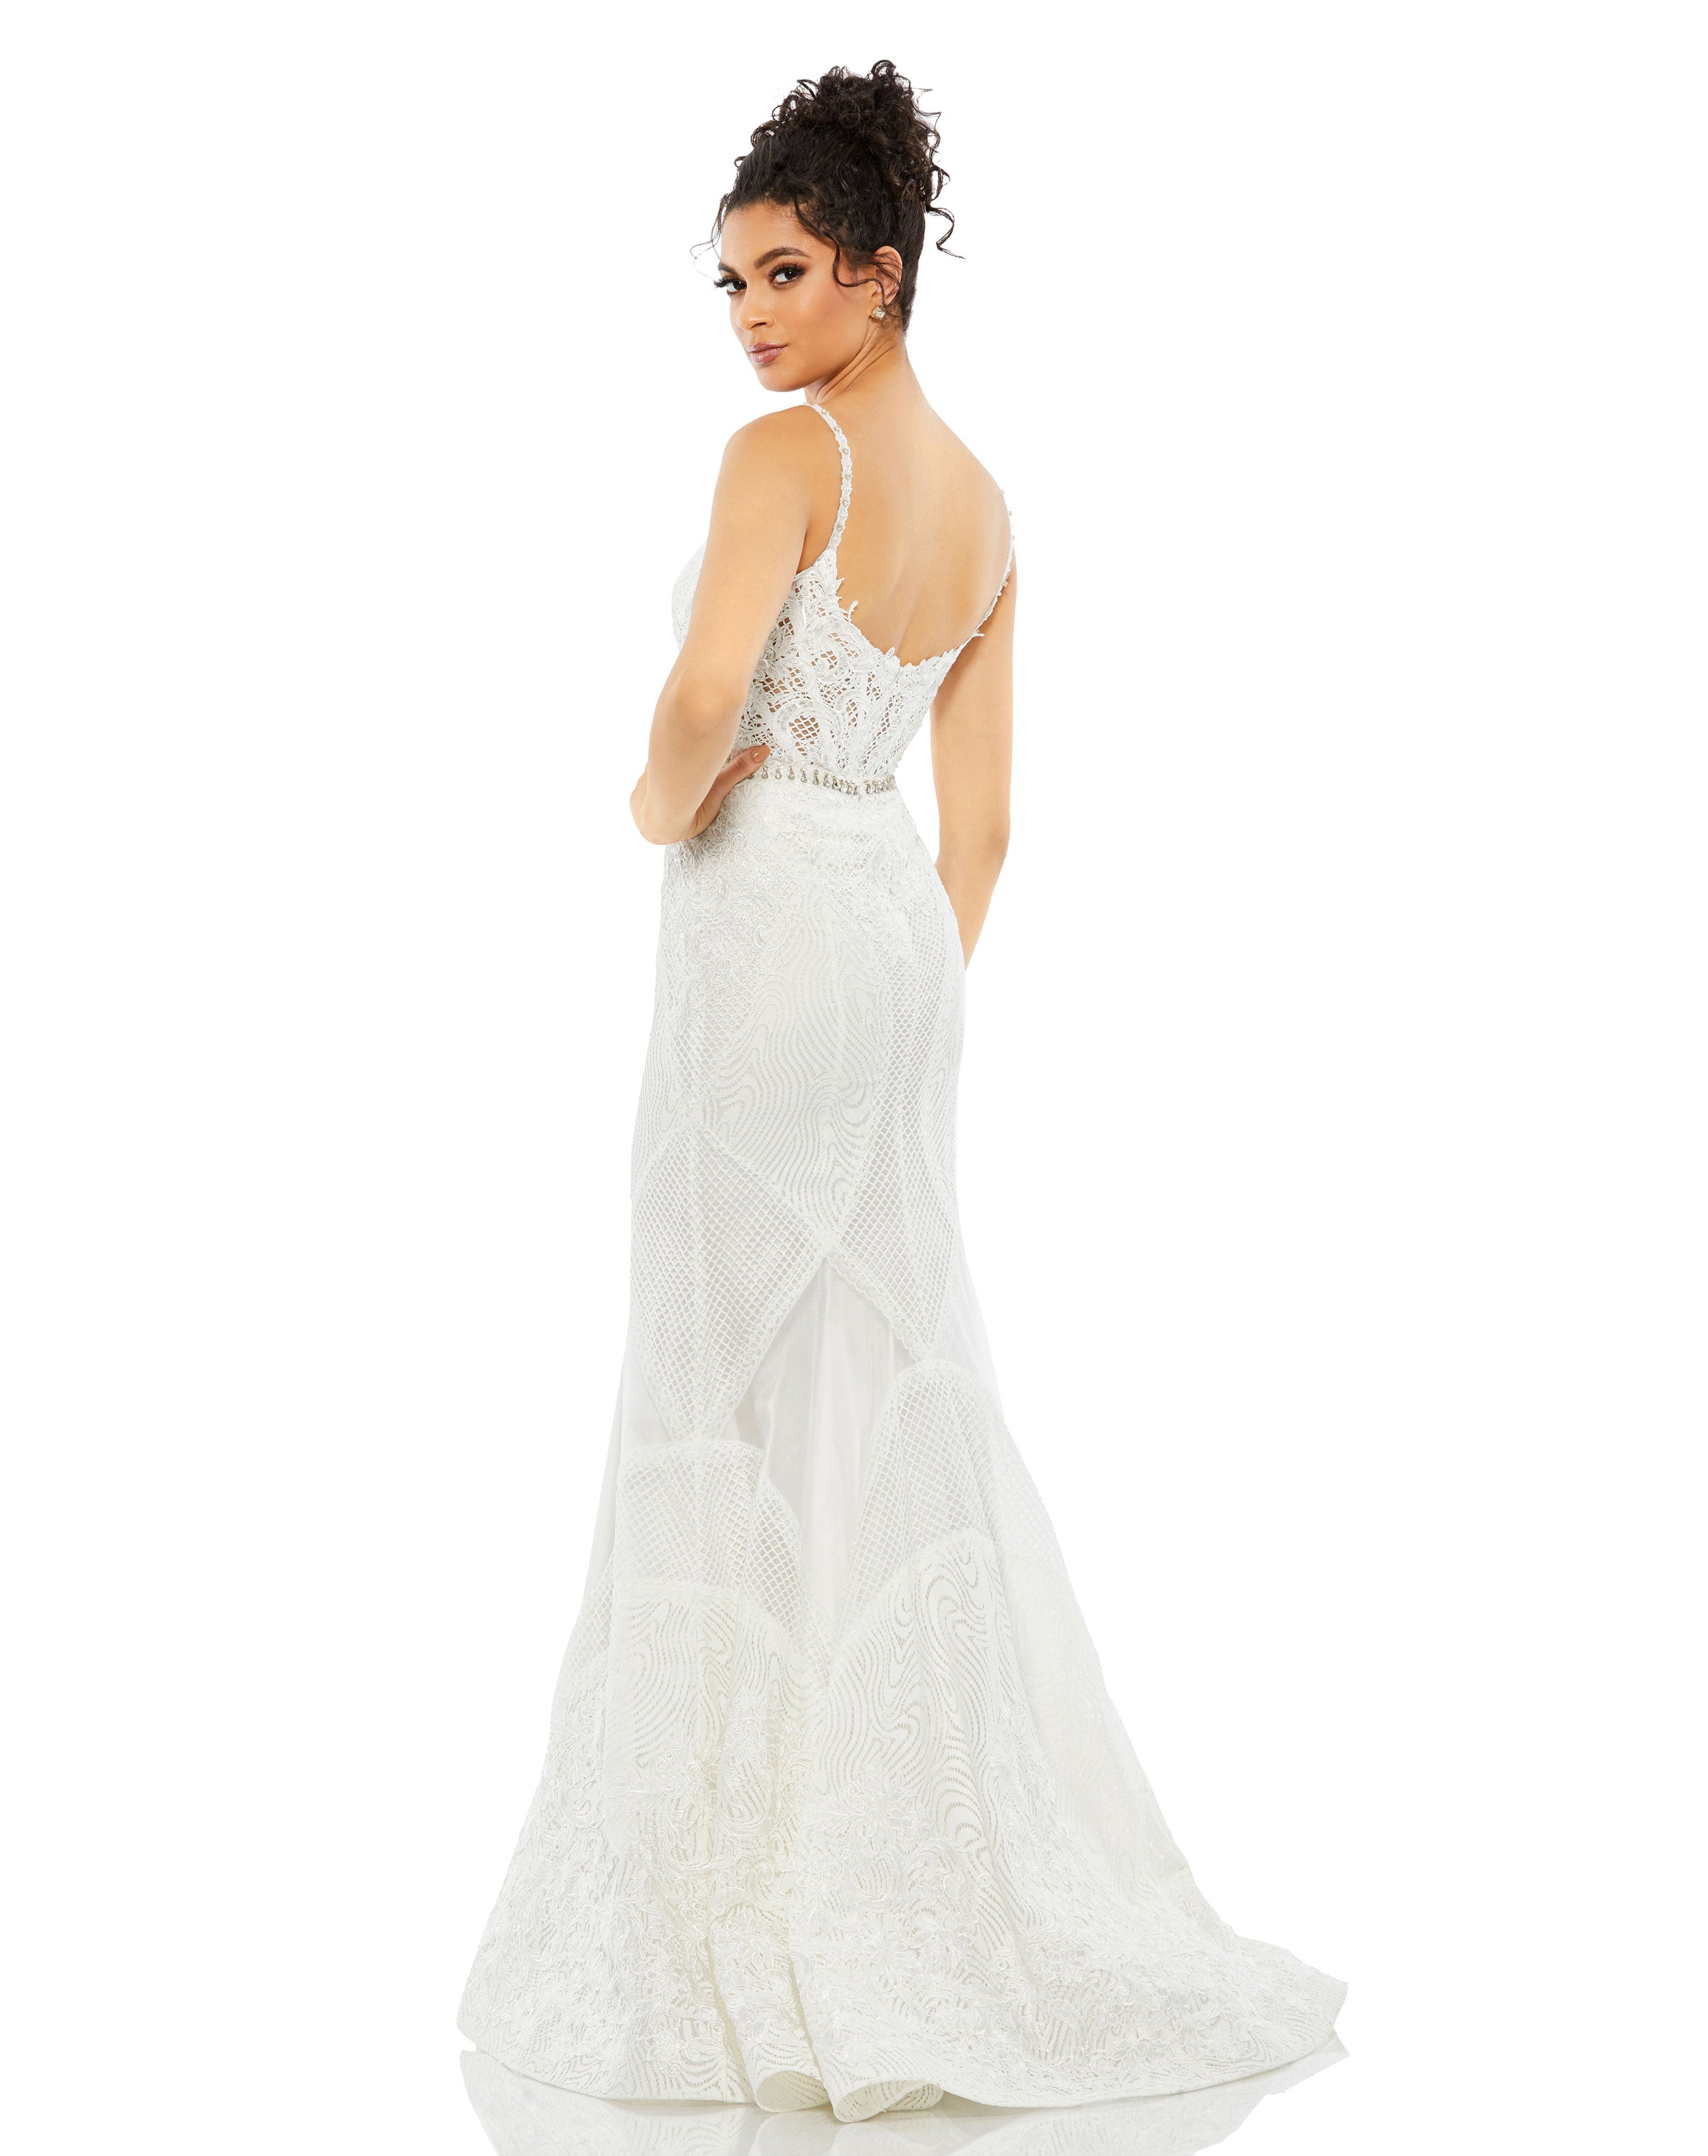 Embroidered Sleeveless Plunge Neck Trumpet Gown